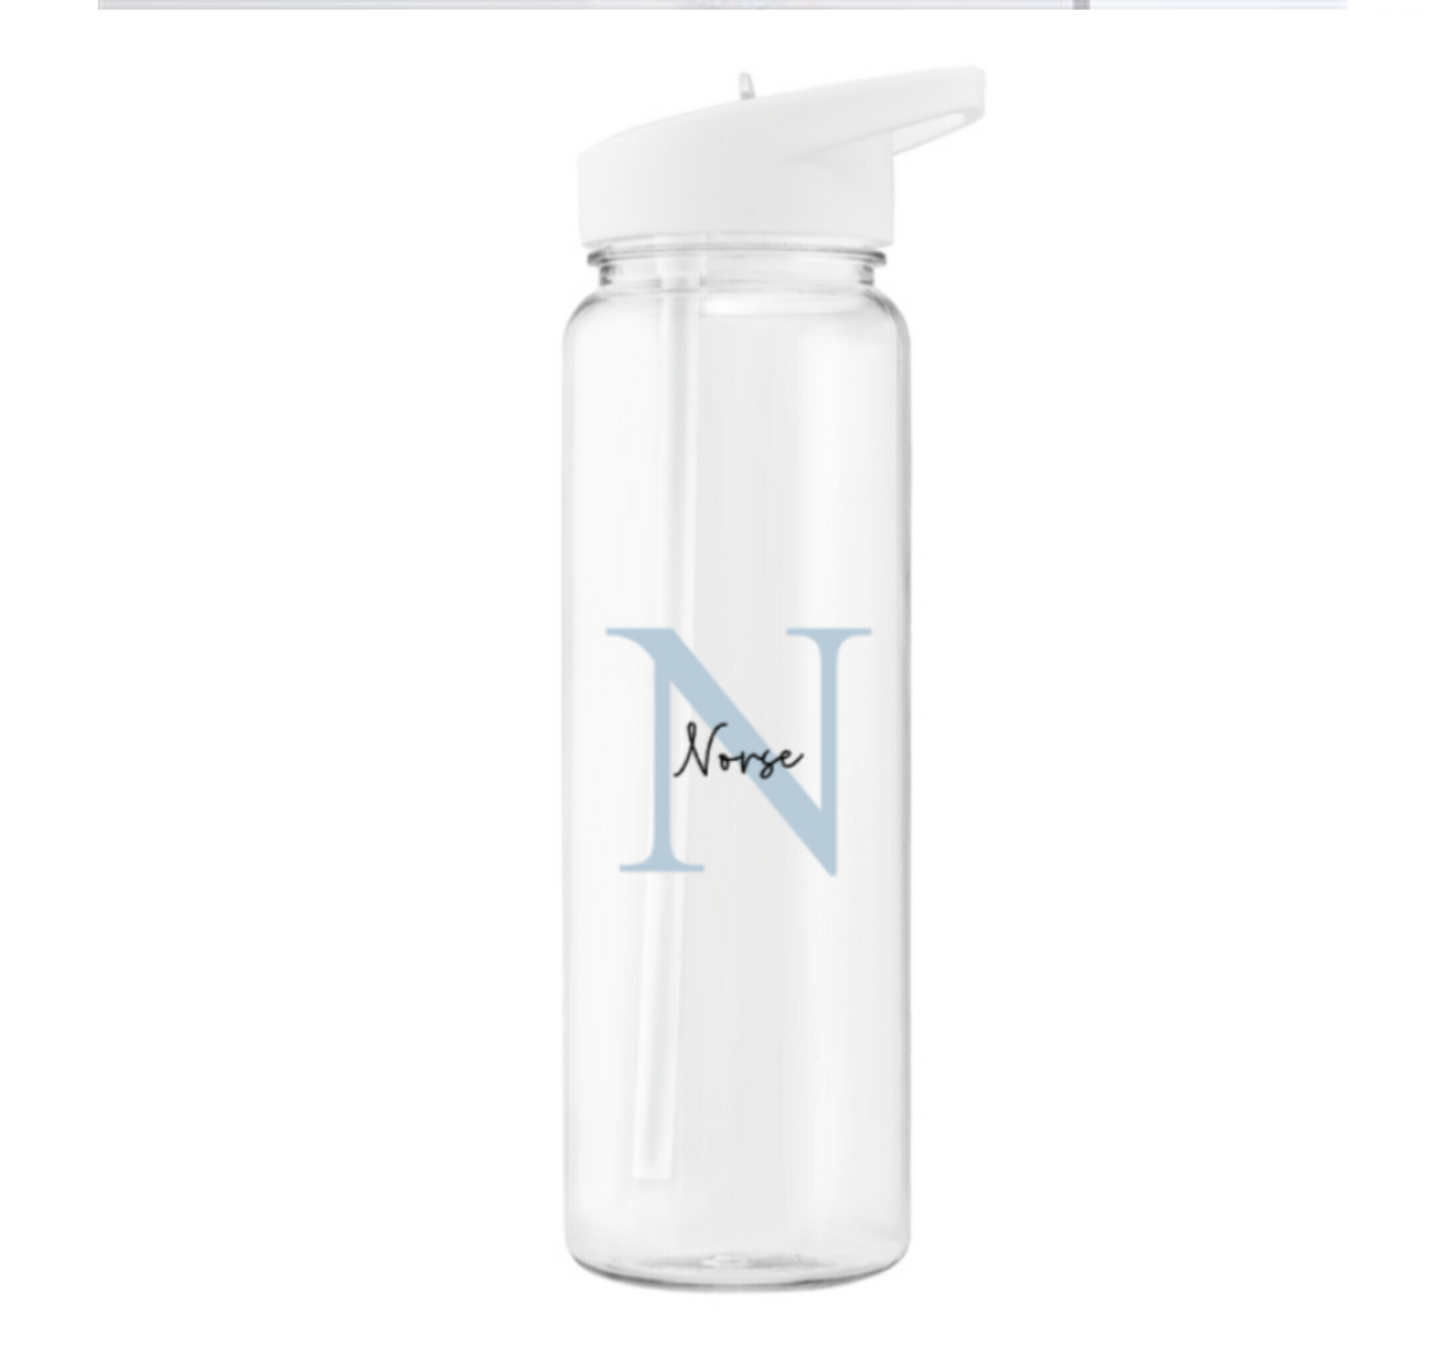 Norse Clear Gym Water Bottle